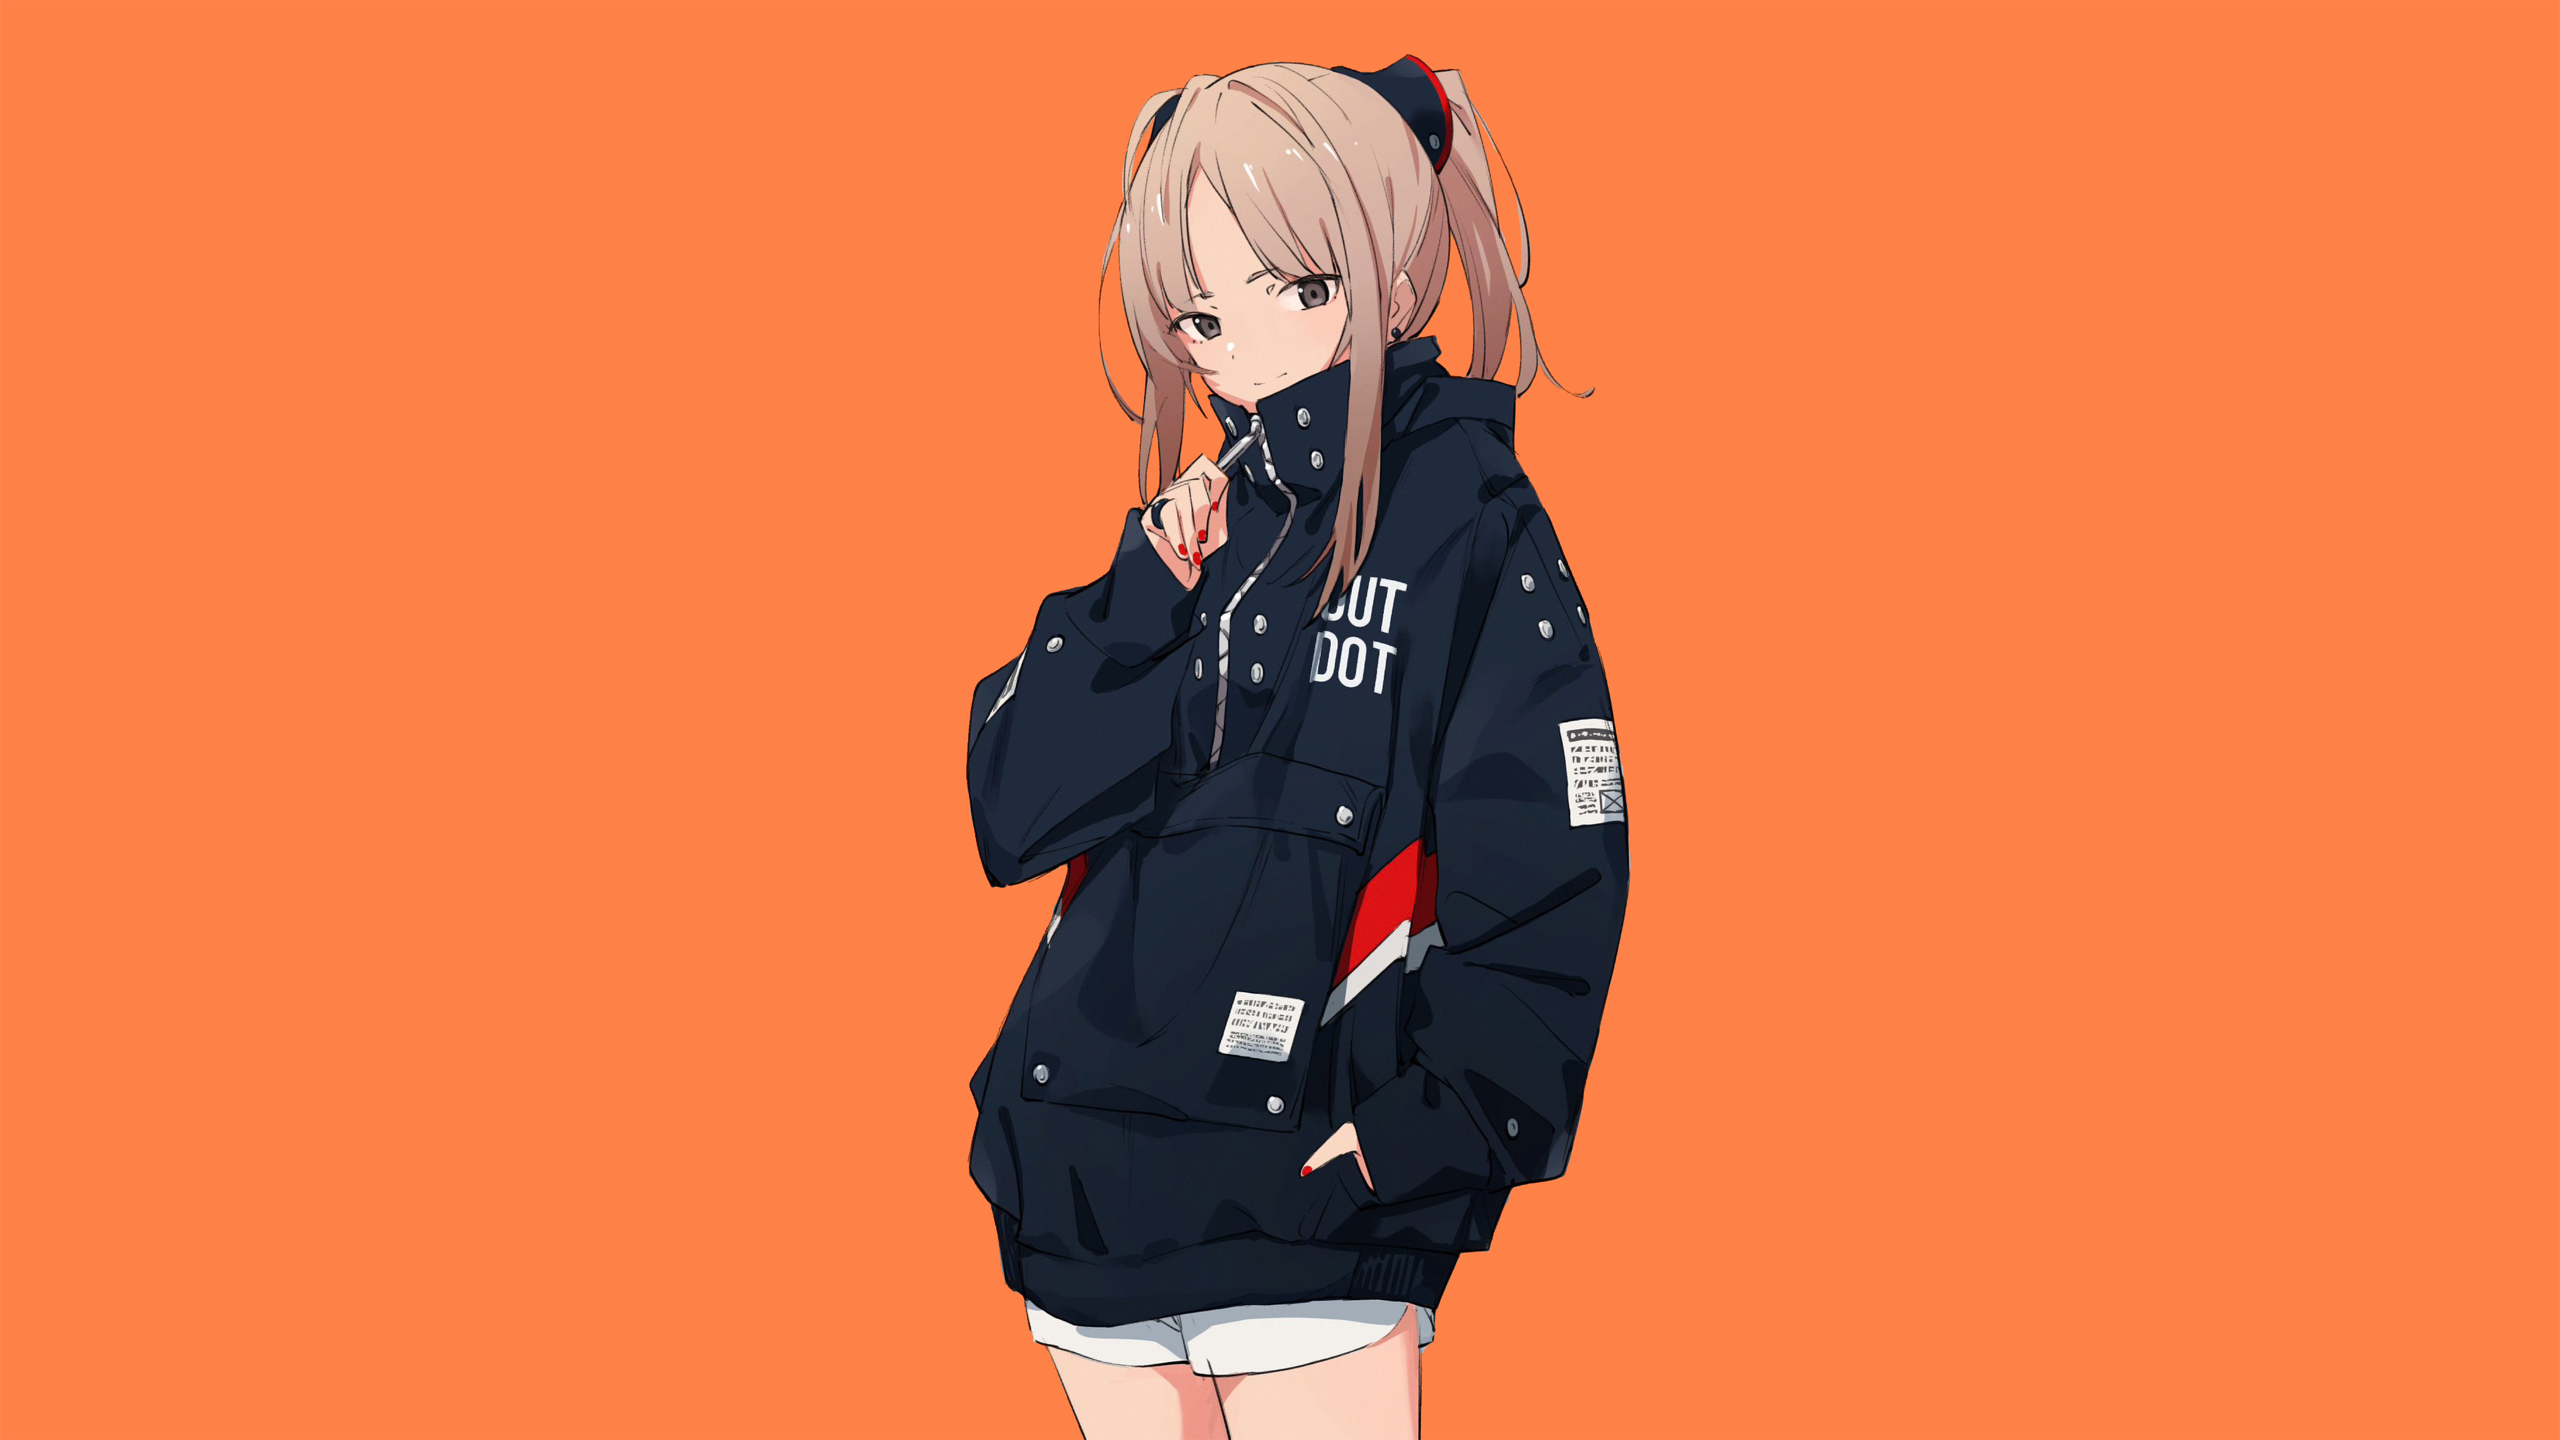 Anime 2560x1440 anime anime girls original characters minimalism simple background artwork drawing 2D Popman3580 orange background jacket looking at viewer smiling short hair hands in pockets